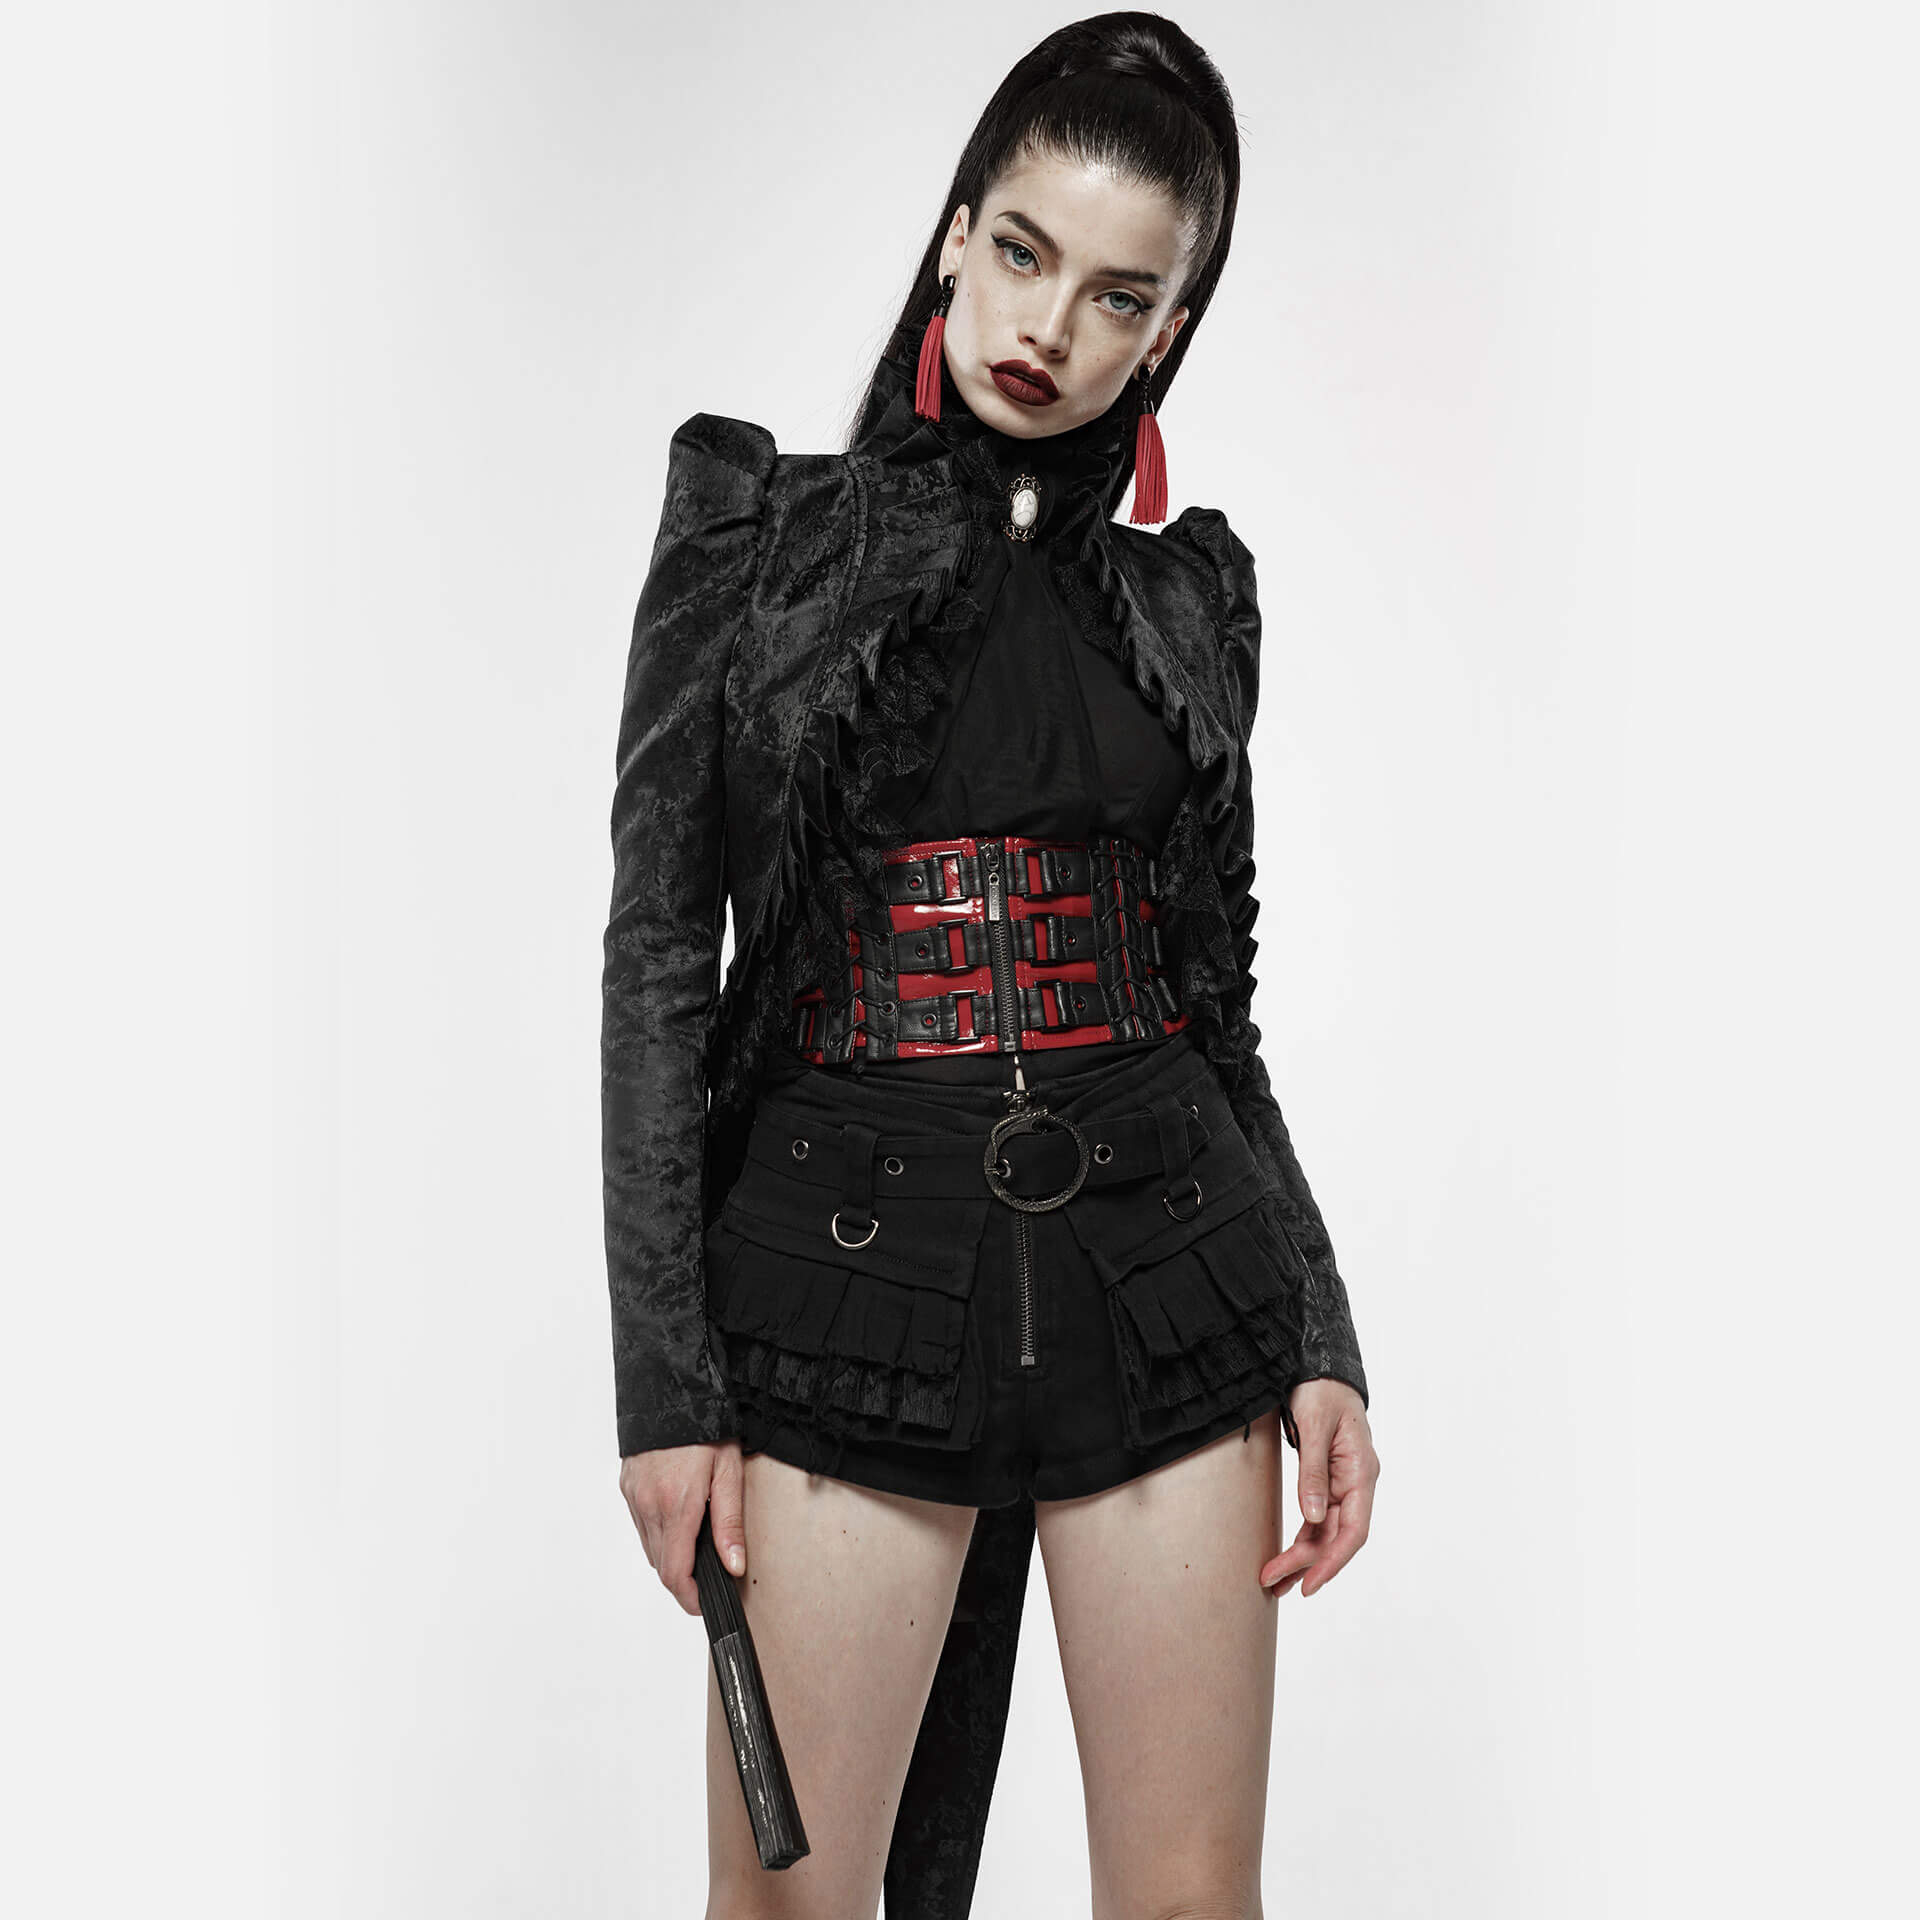 Versailles Tailcoat WY-1139/BK by PUNK RAVE brand